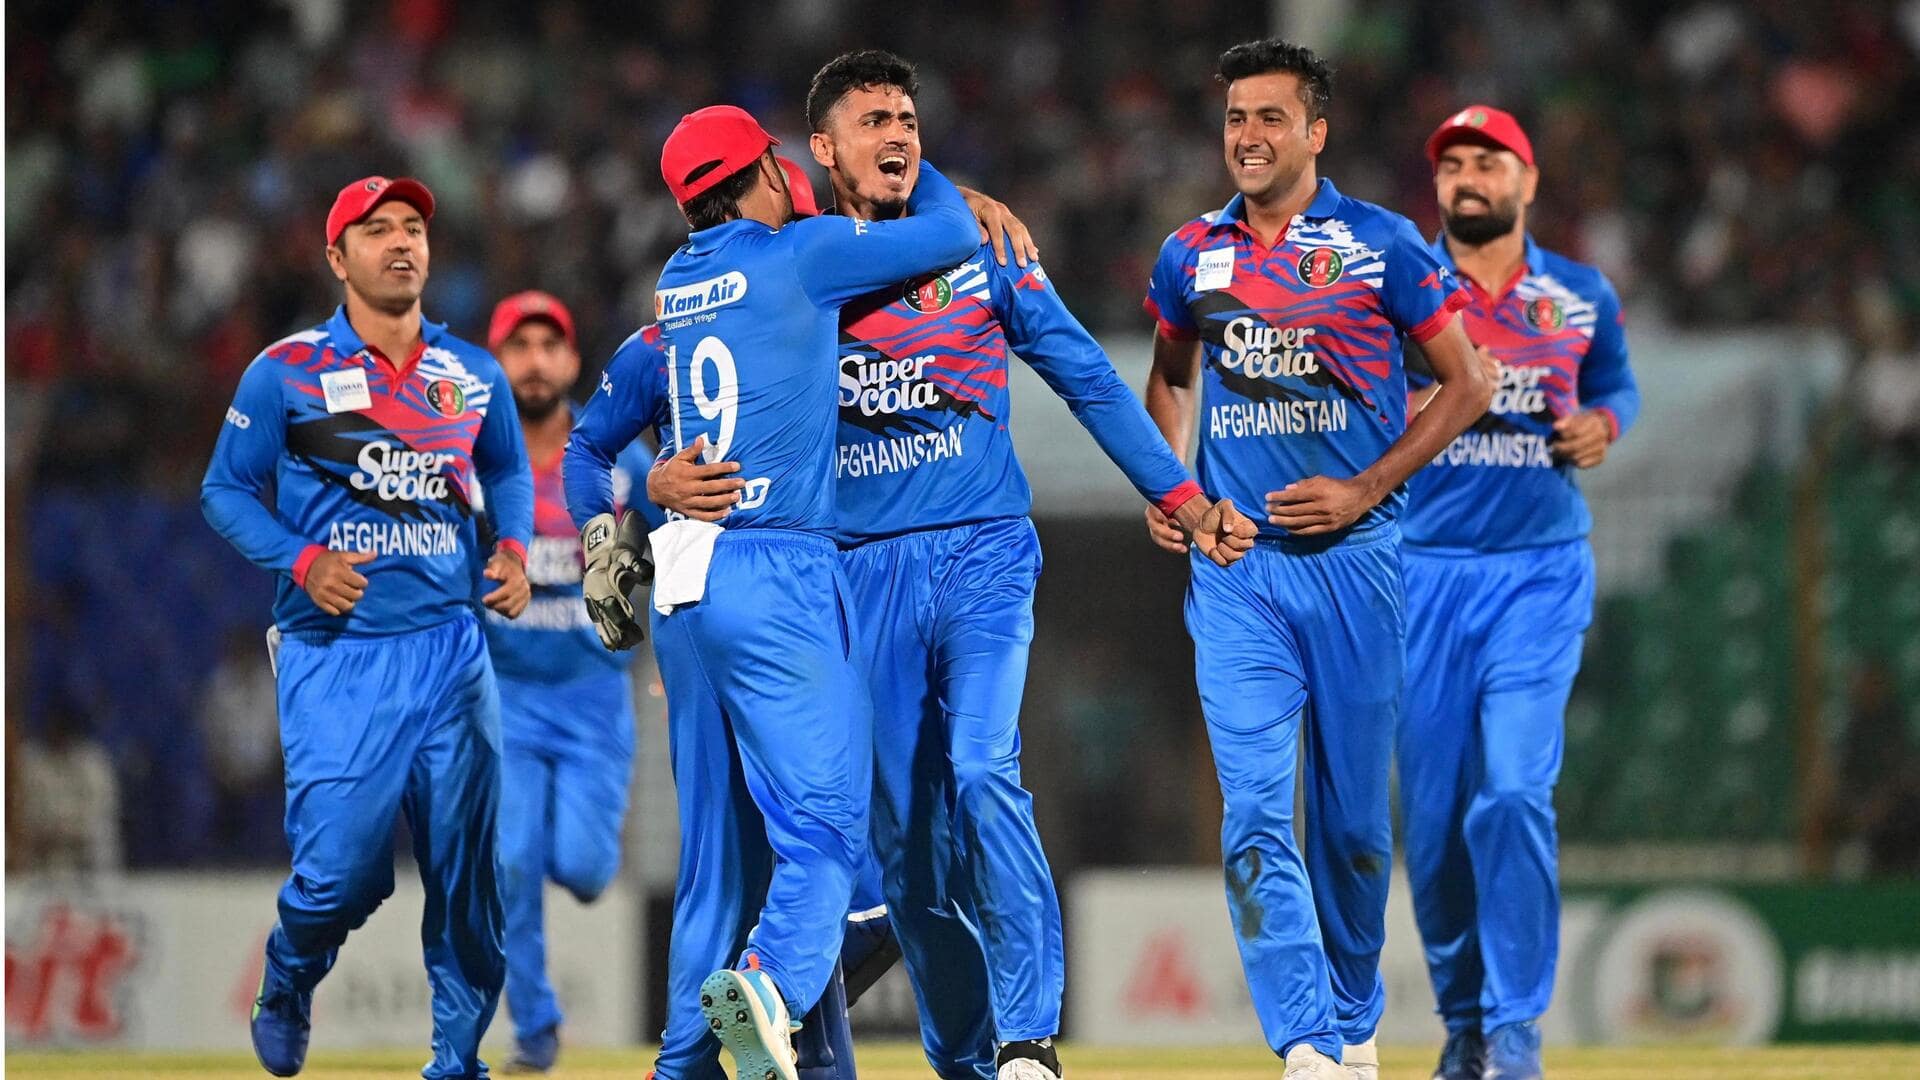 ICC Cricket World Cup, Afghanistan vs Sri Lanka: Statistical preview